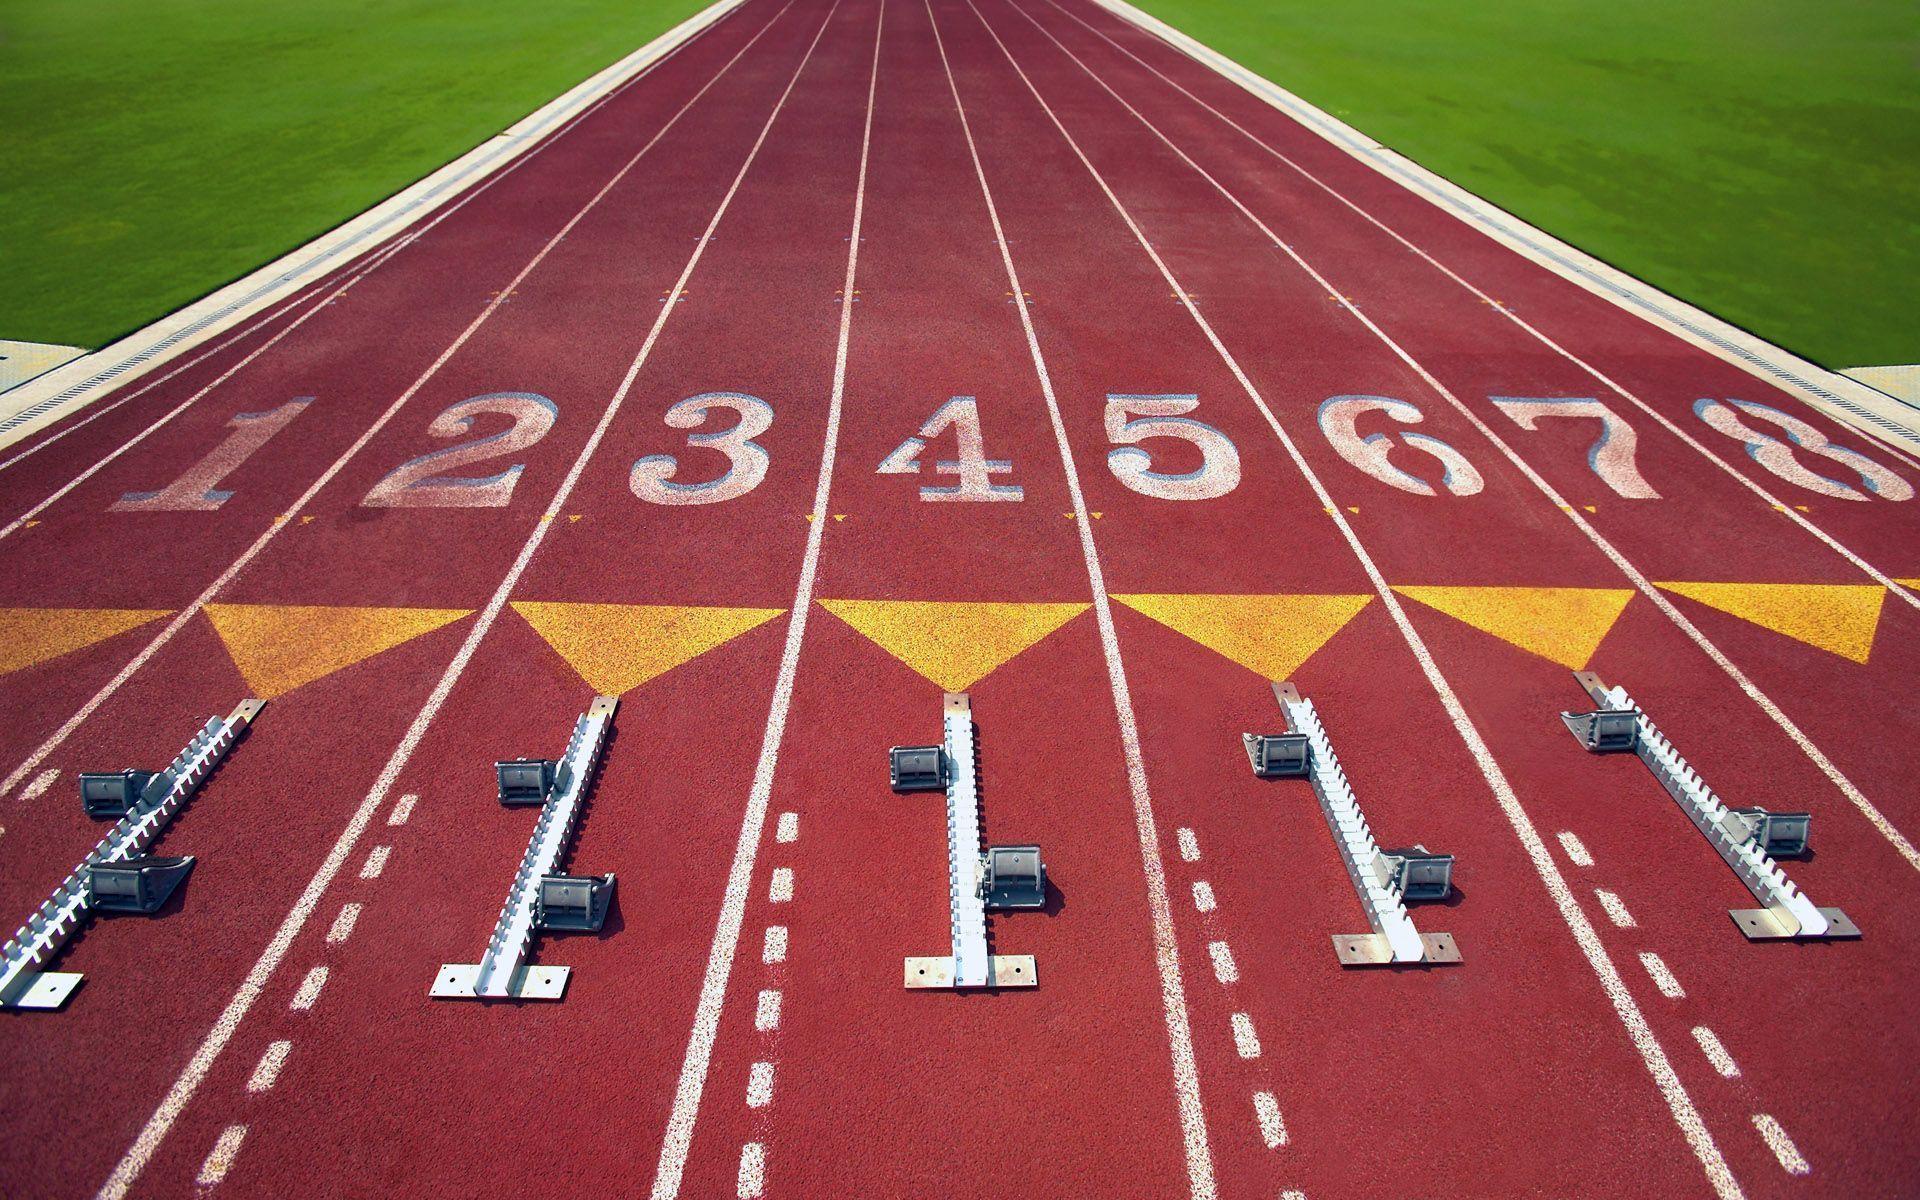 Pix For Track And Field Olympics Wallpapers.